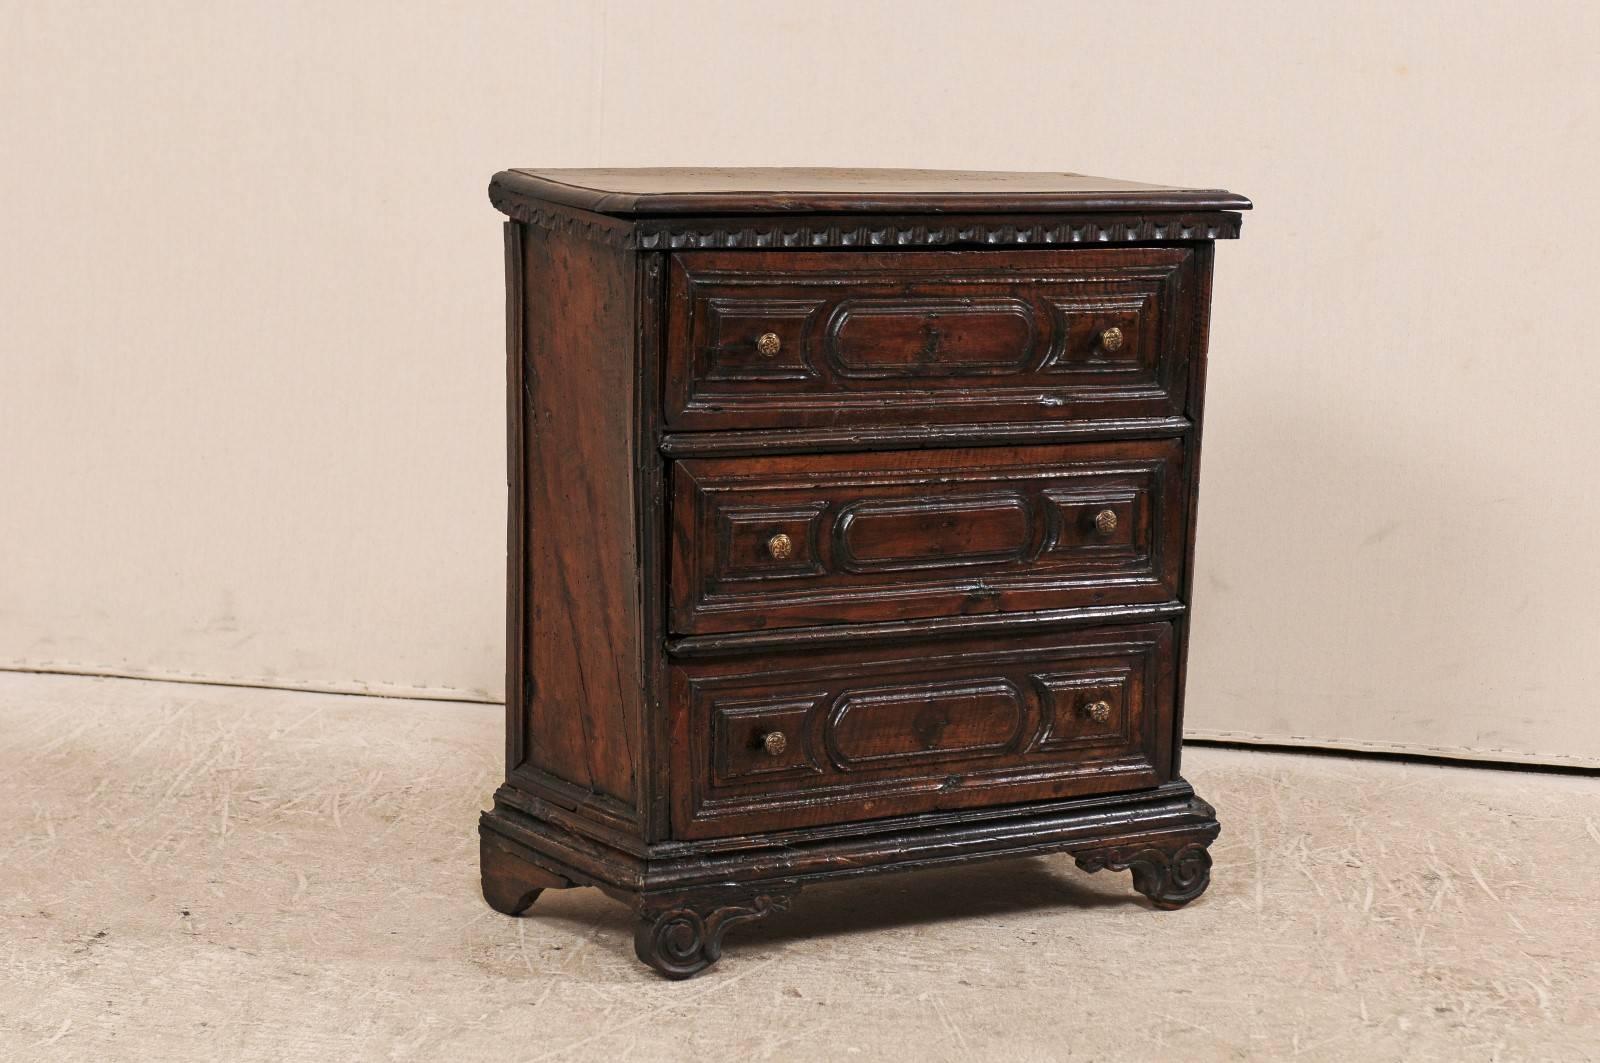 An early 18th century Italian three-drawer small commode. This antique Italian commode of dark walnut features three carved front doors, and an egg-and-dart molding motif along the top edge. This chest is raised upon bracket feet, the fronts which